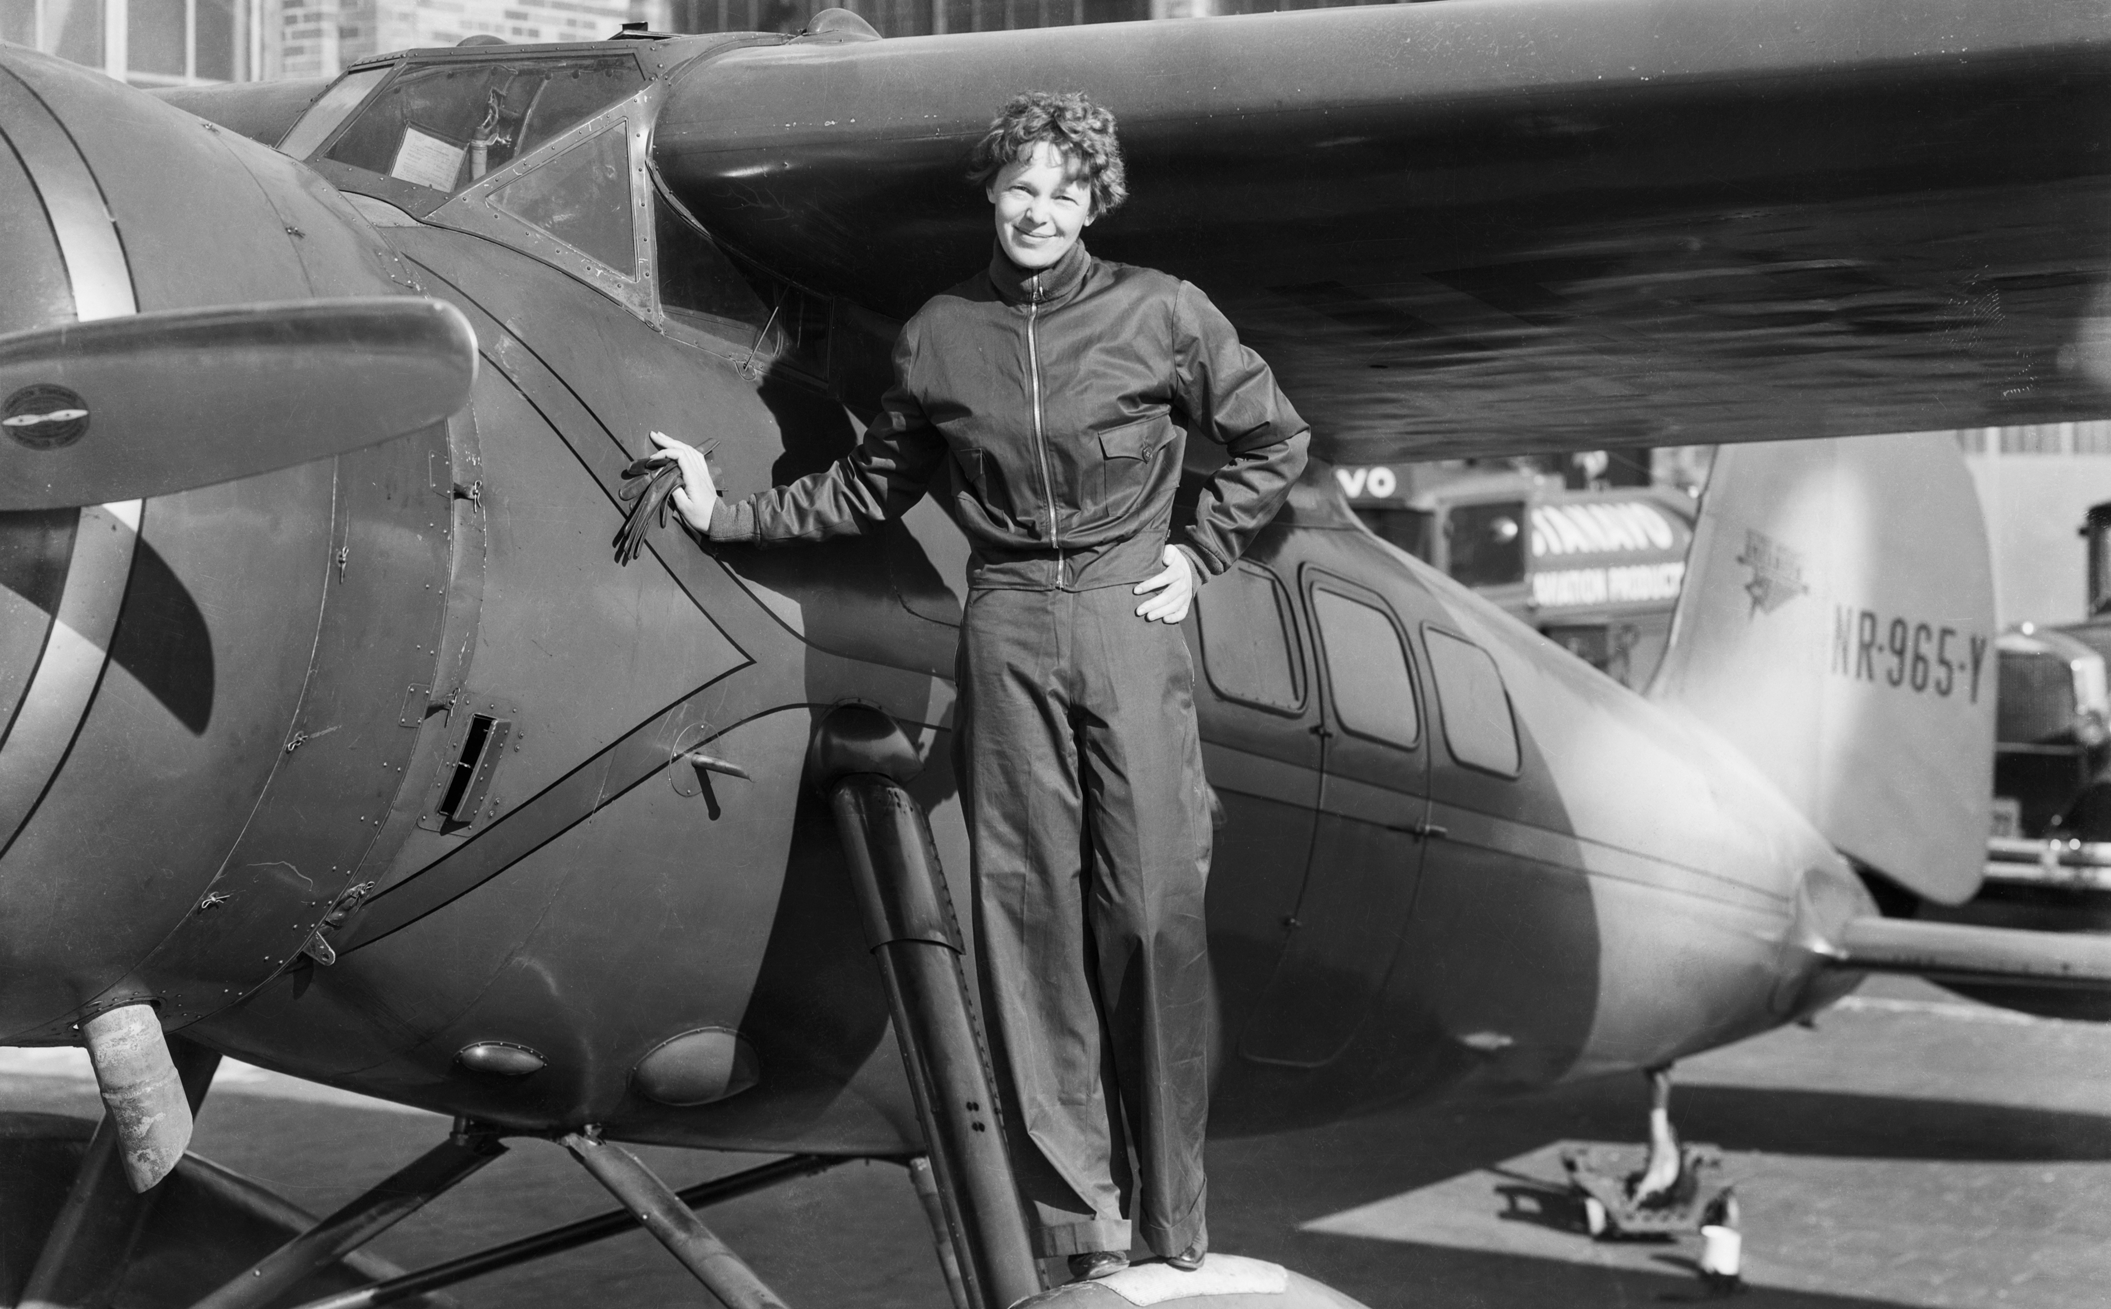 Man Discovers Last Known Letter Before Amelia Earhart's Disappearance